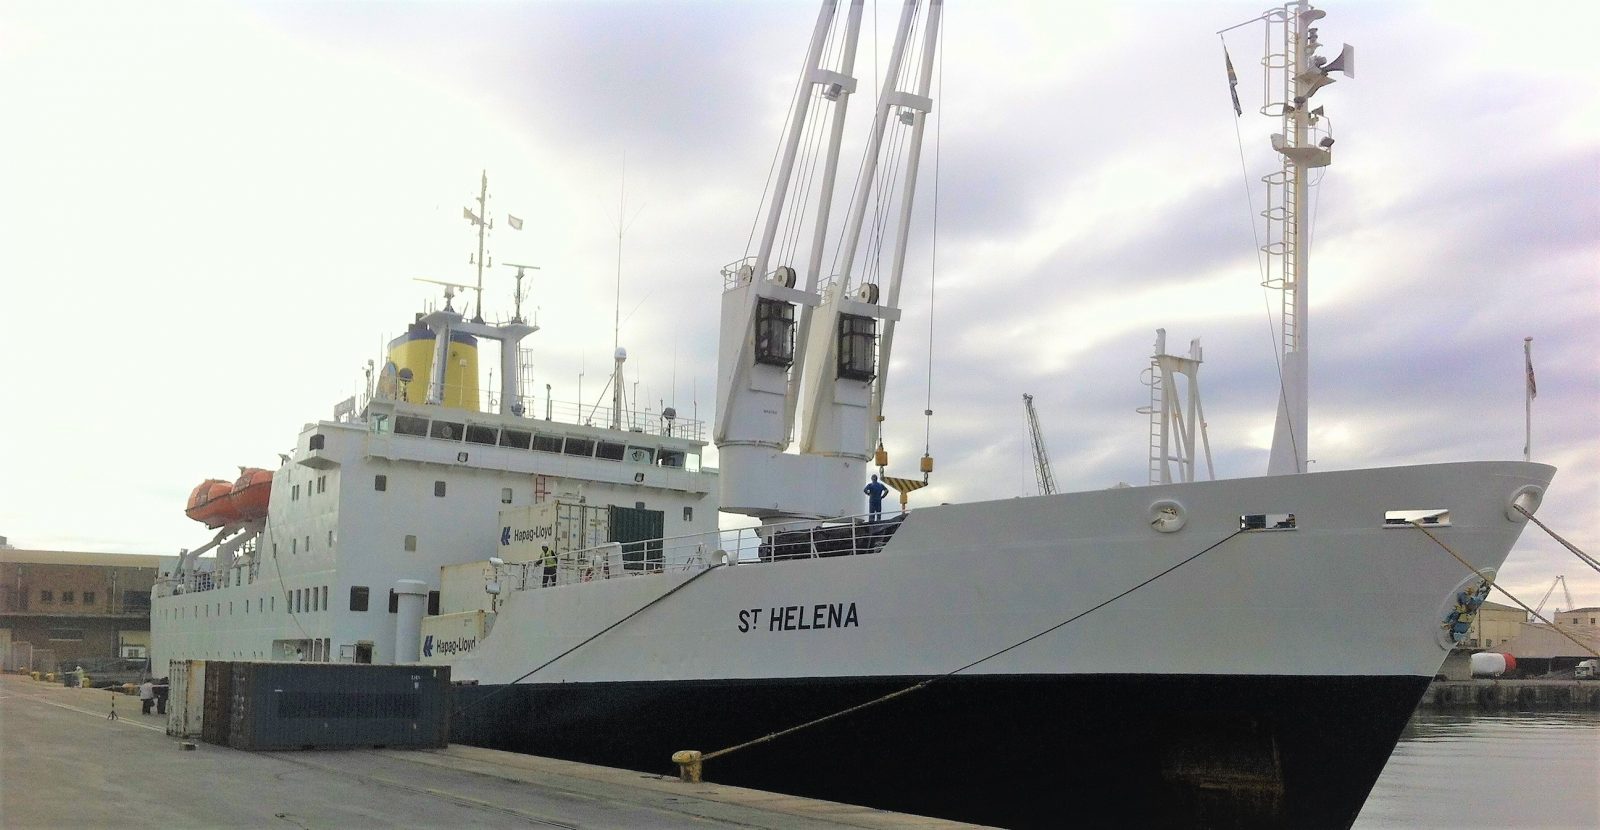 The RMS St Helena: 6 delightful days at sea